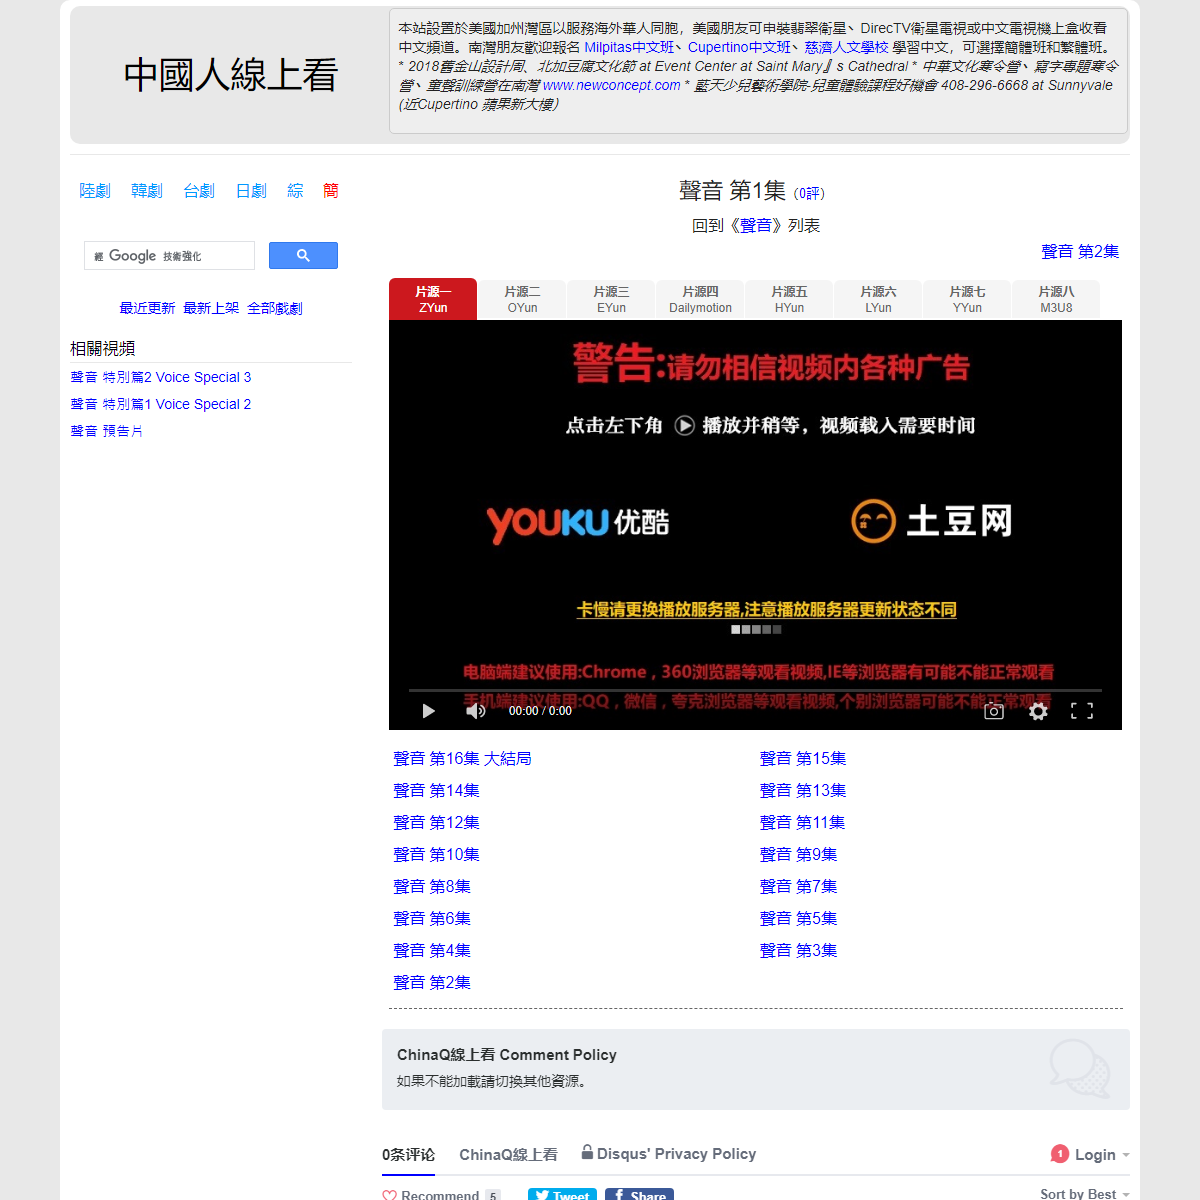 A complete backup of https://chinaq.tv/voicee/1.html